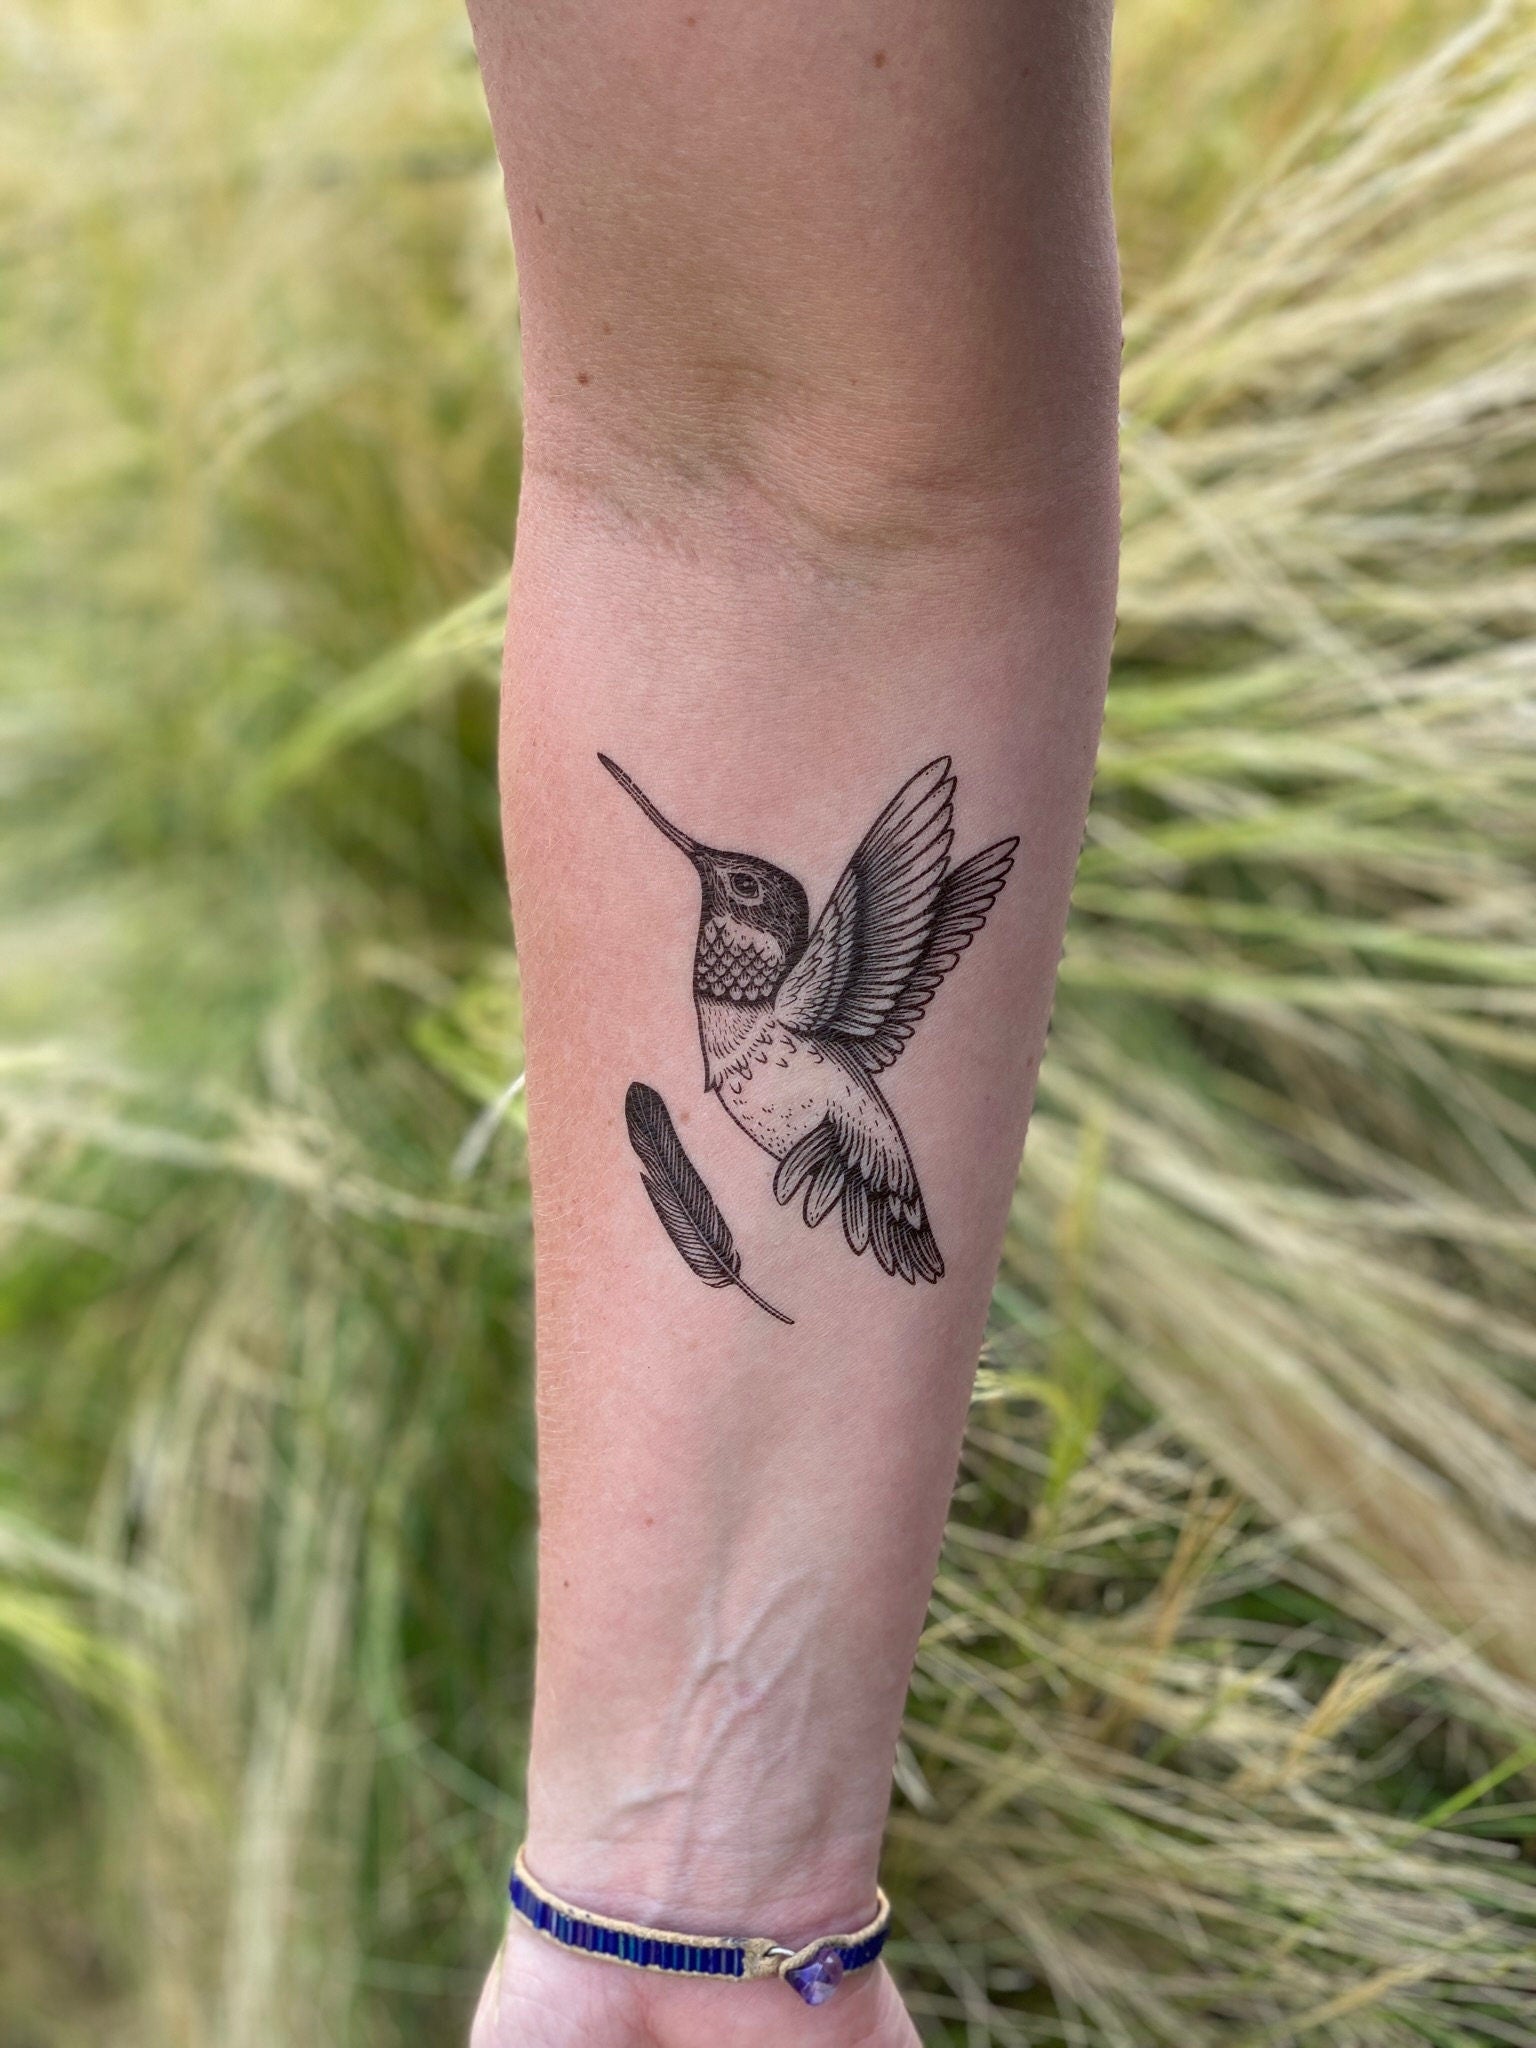 Feather Tattoos: Designs, Ideas, and Meanings - TatRing